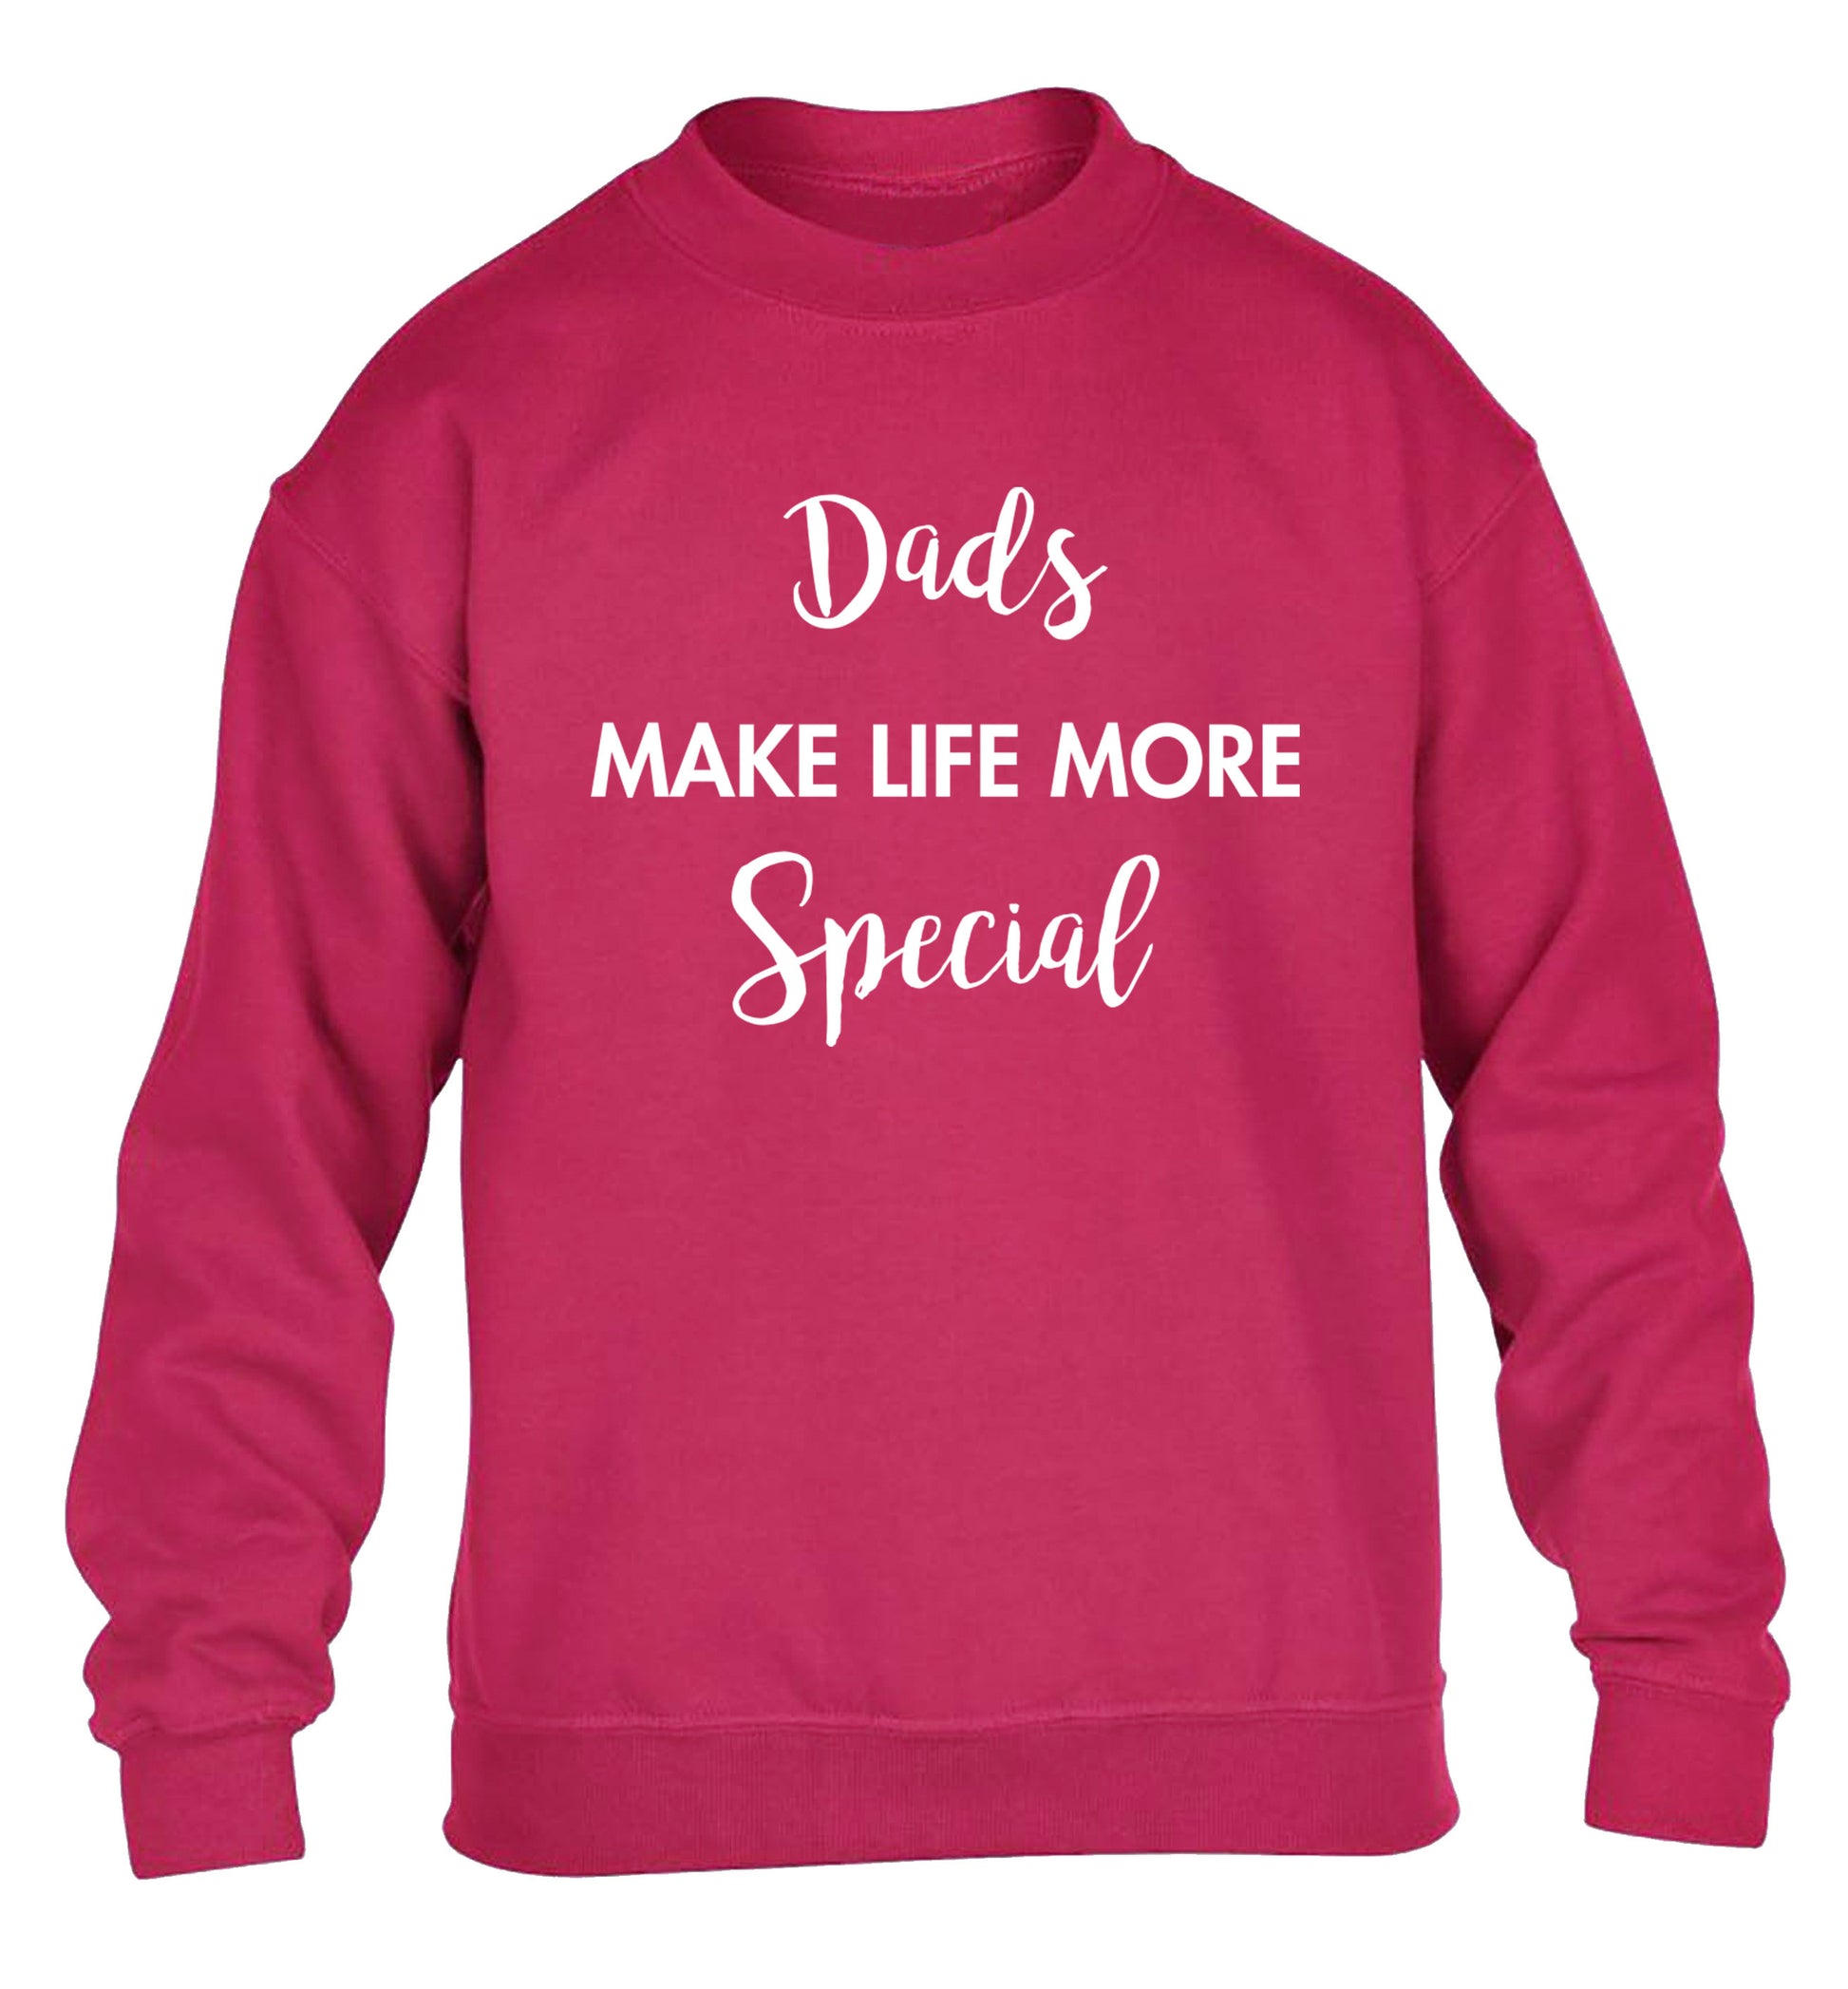 Dads make life more special children's pink sweater 12-14 Years